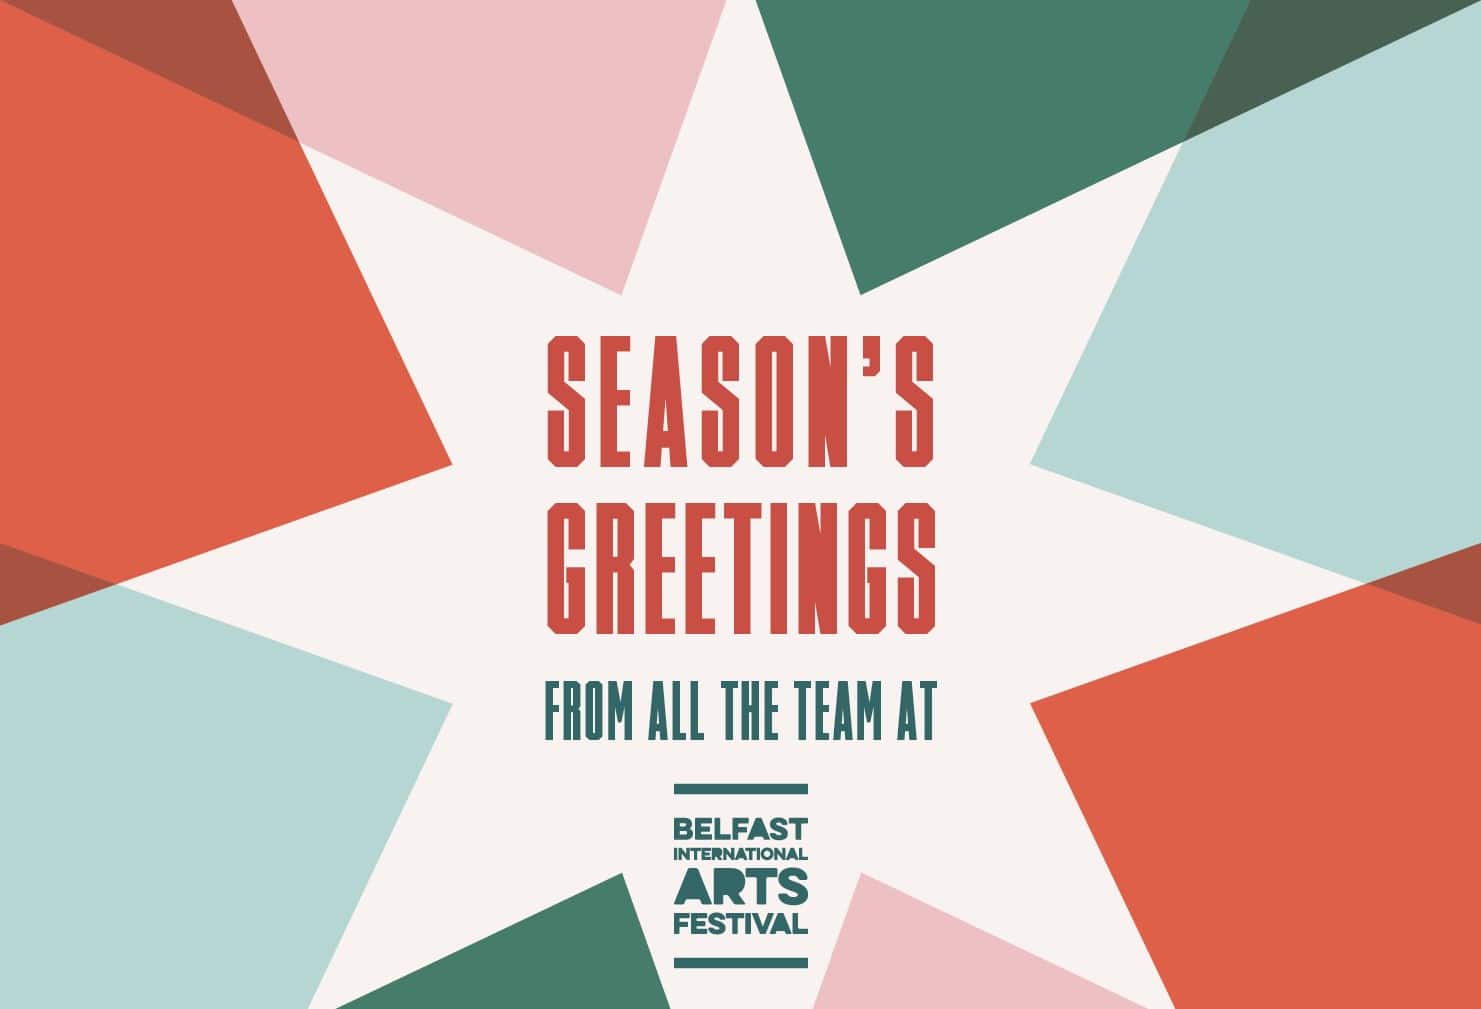 Seasons greetings from all the team at Belfast International Arts Festival